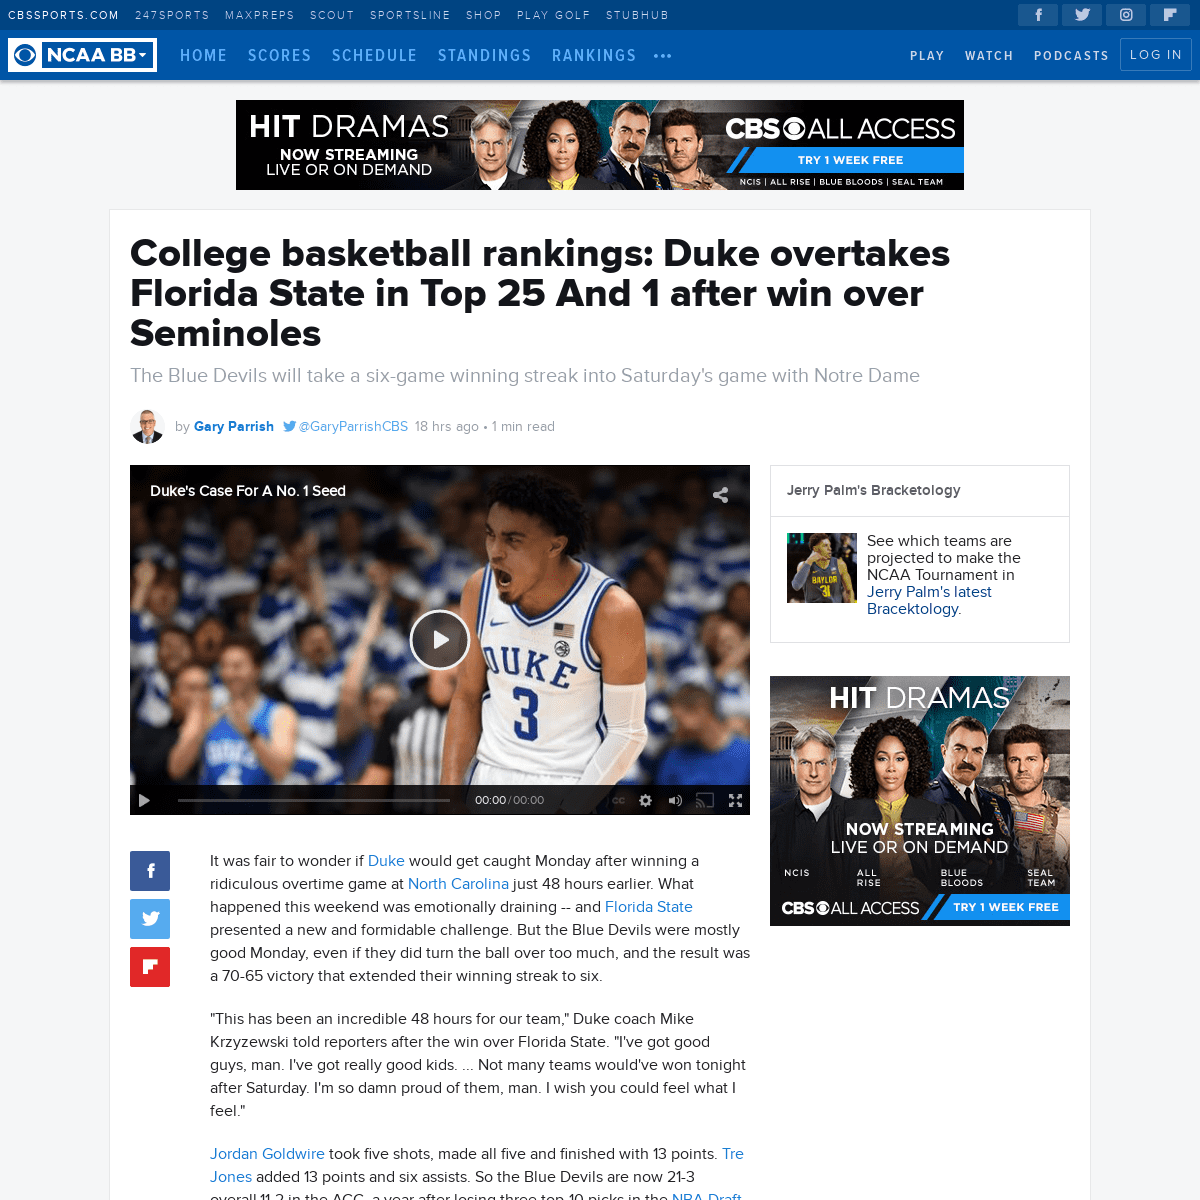 A complete backup of www.cbssports.com/college-basketball/news/college-basketball-rankings-duke-overtakes-florida-state-in-top-2